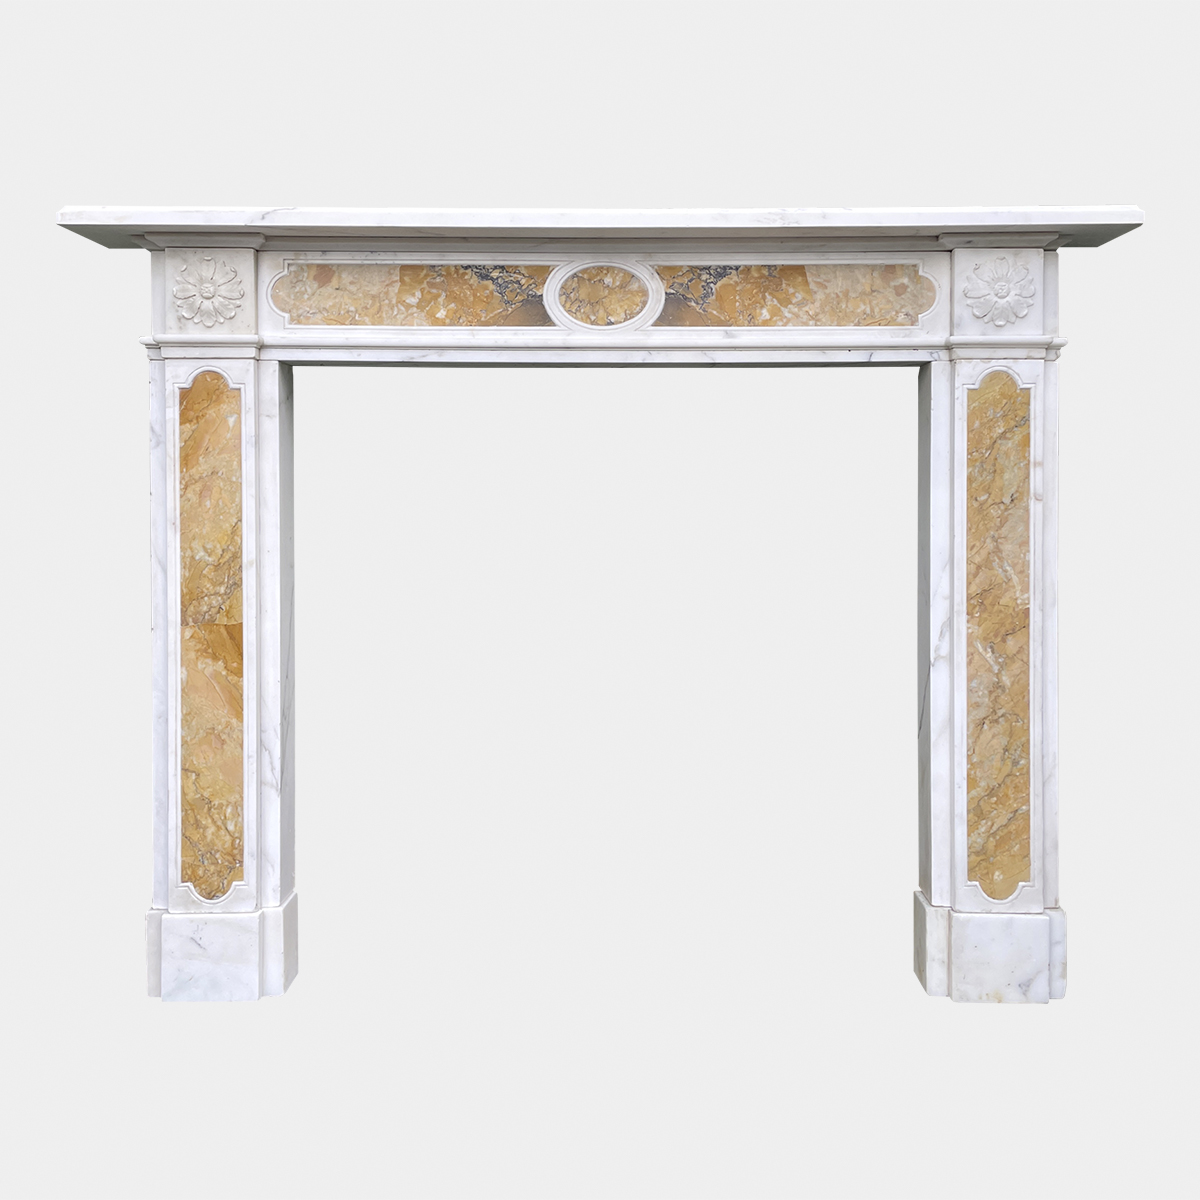 Antique Regency Style Statuary and Siena Marble Fireplace